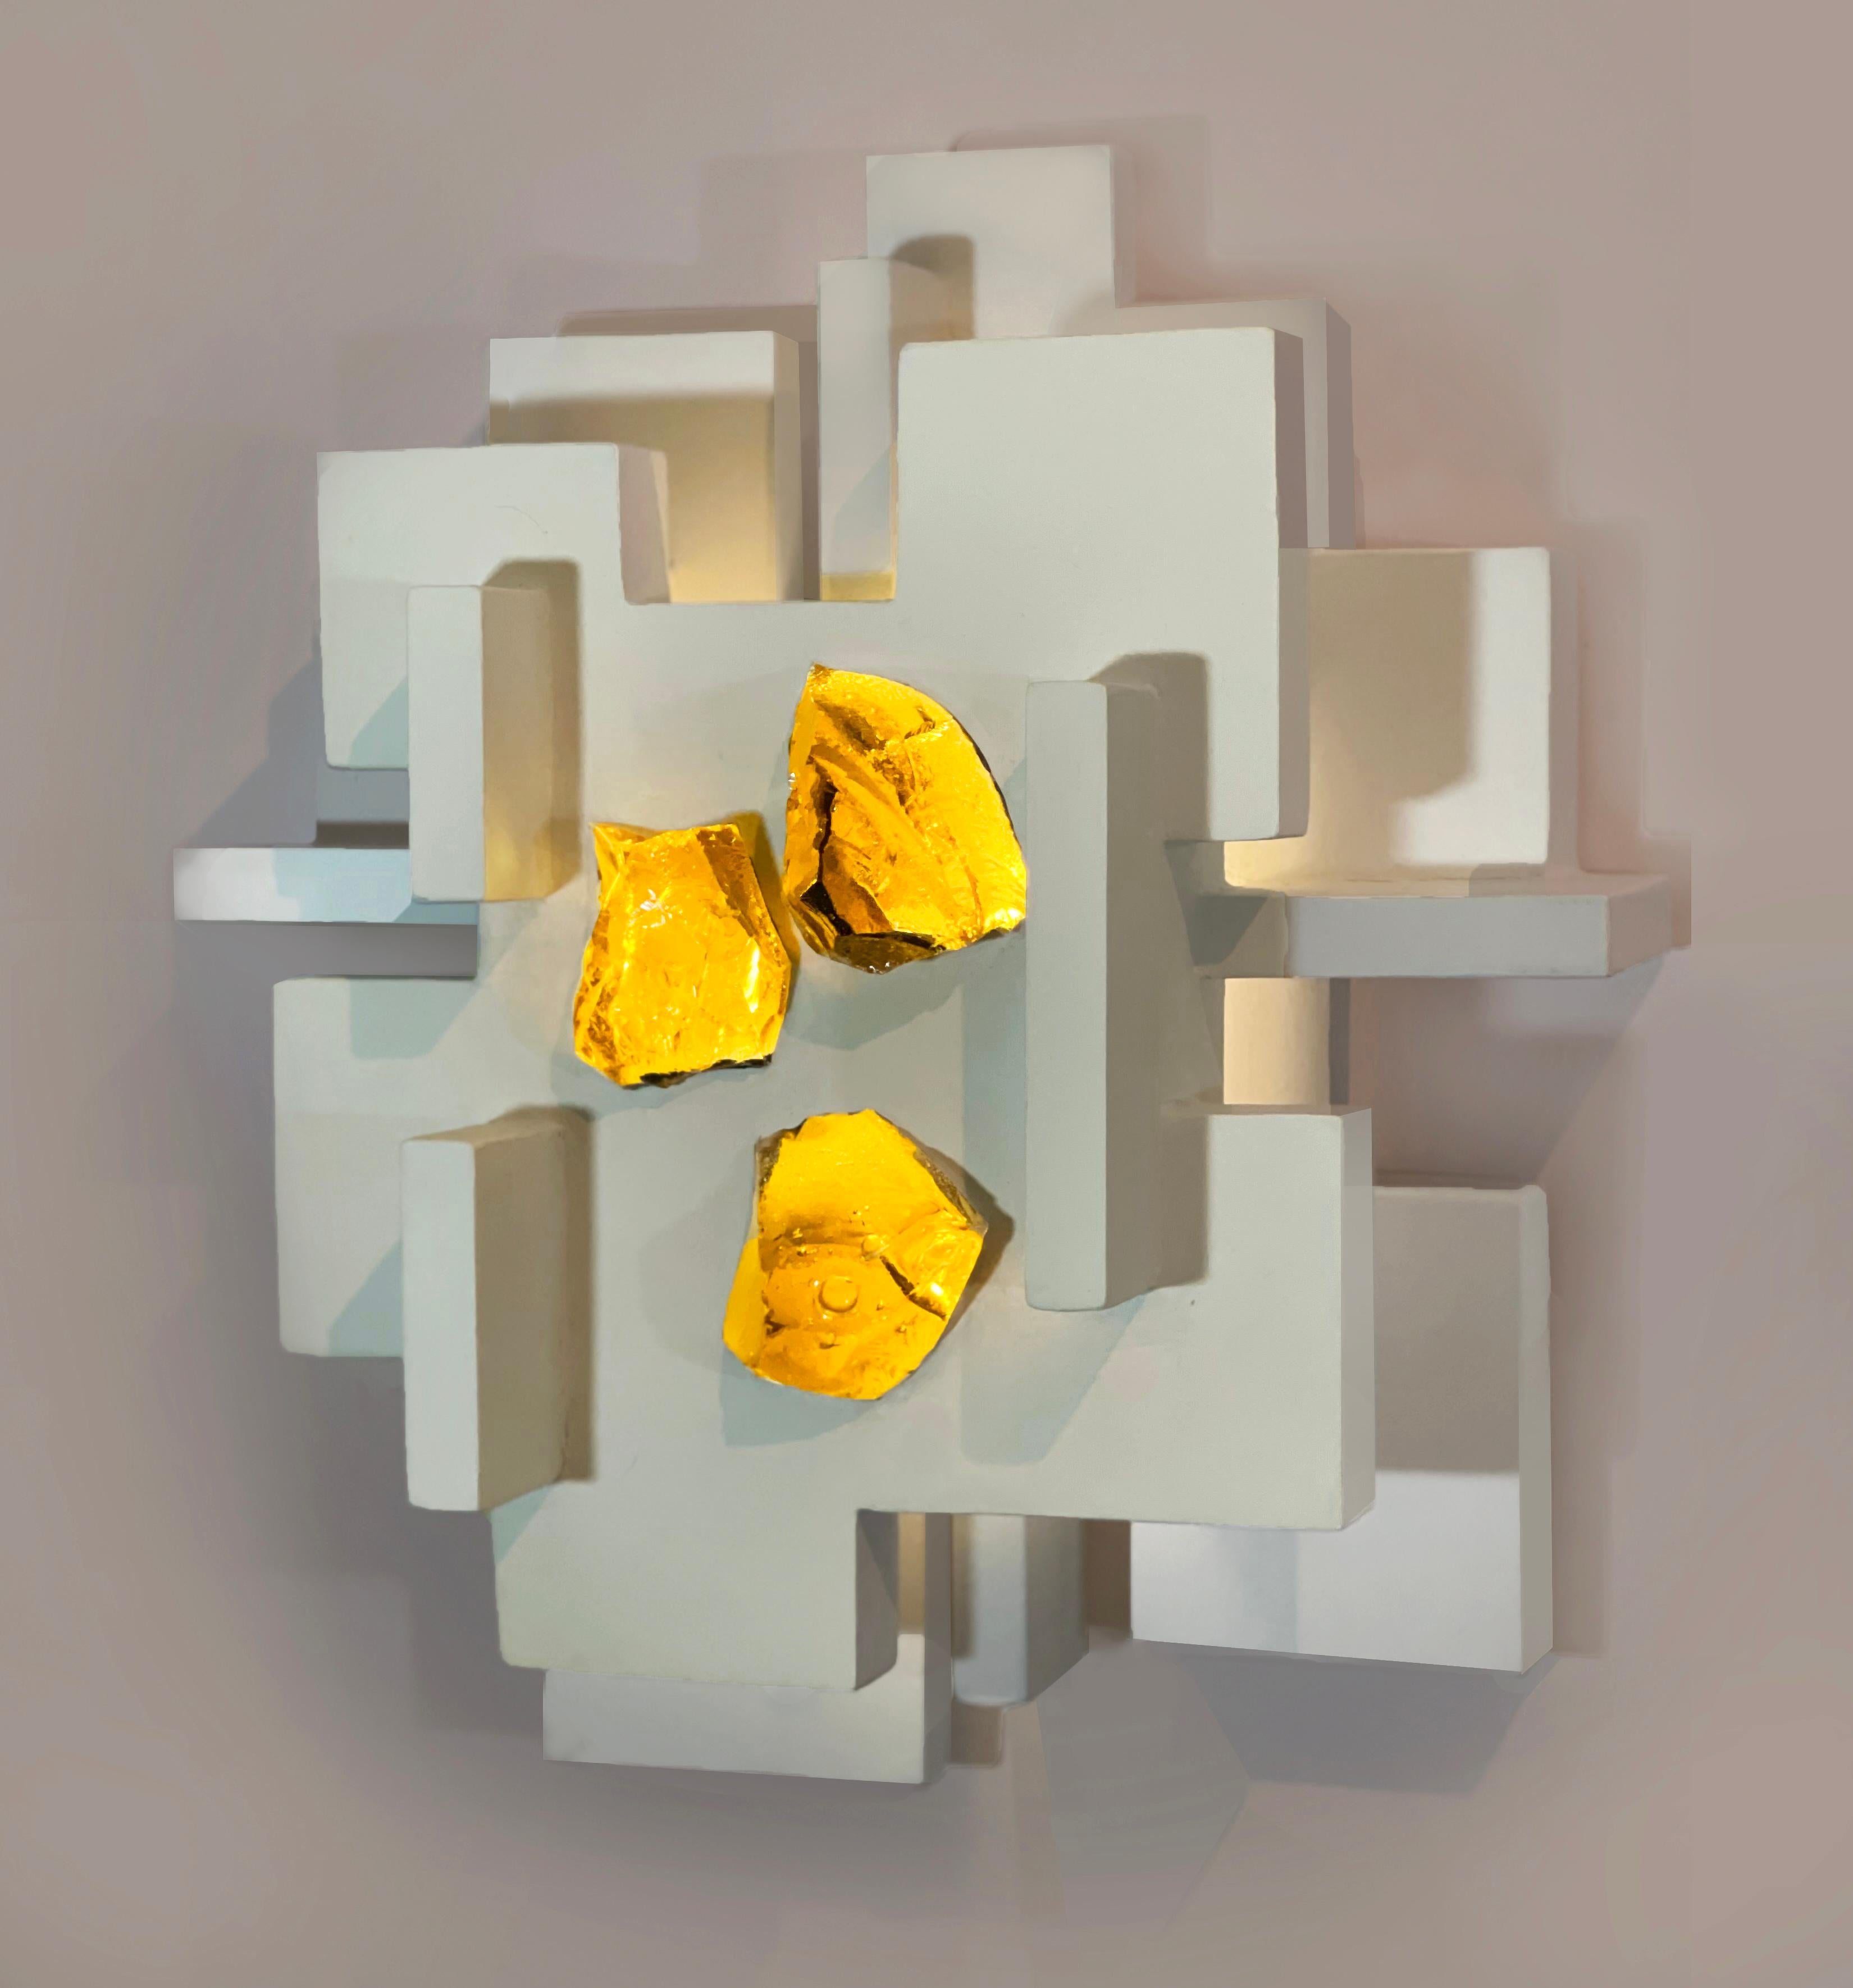 Jurgen wall sconce by Daniel Schneiger
Dimensions: D 36 x W 41 x H 15 cm
Materials: Wood, slag glass and resin
Custom finishes available, Custom slag glass colors available.

All our lamps can be wired according to each country. If sold to the